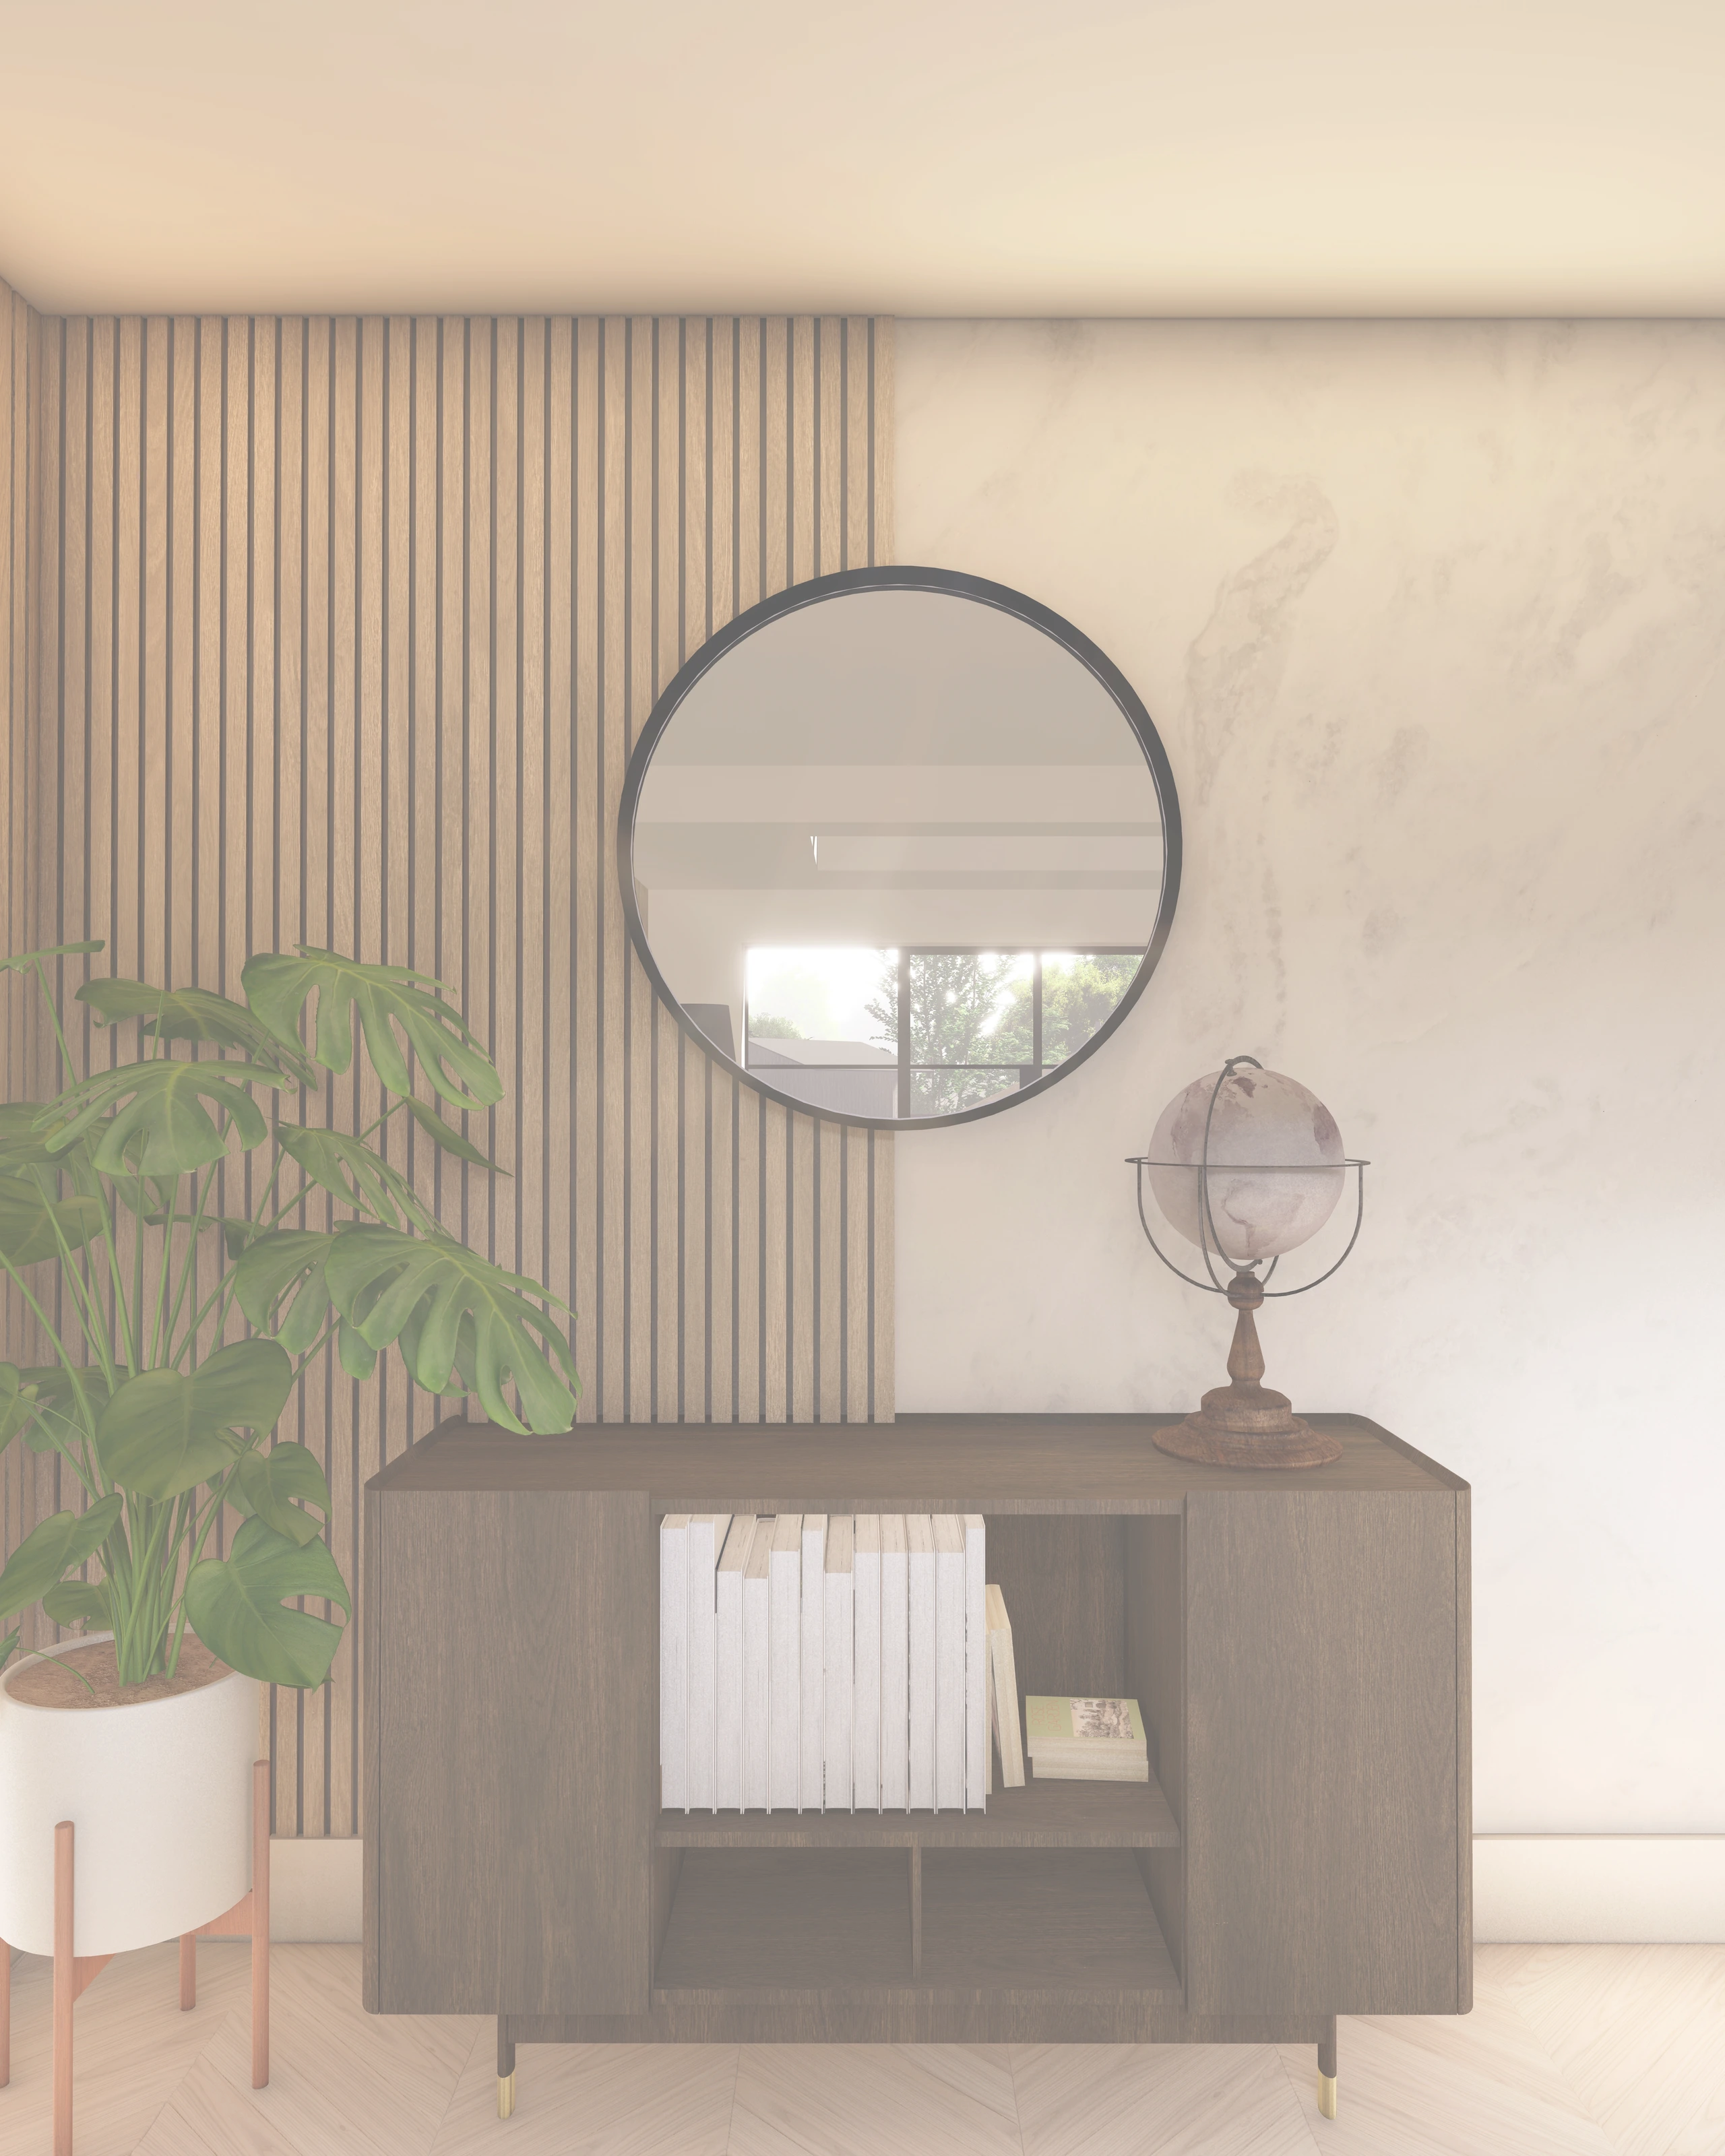 CGI of Home Interior Featuring Wooden Cabinet